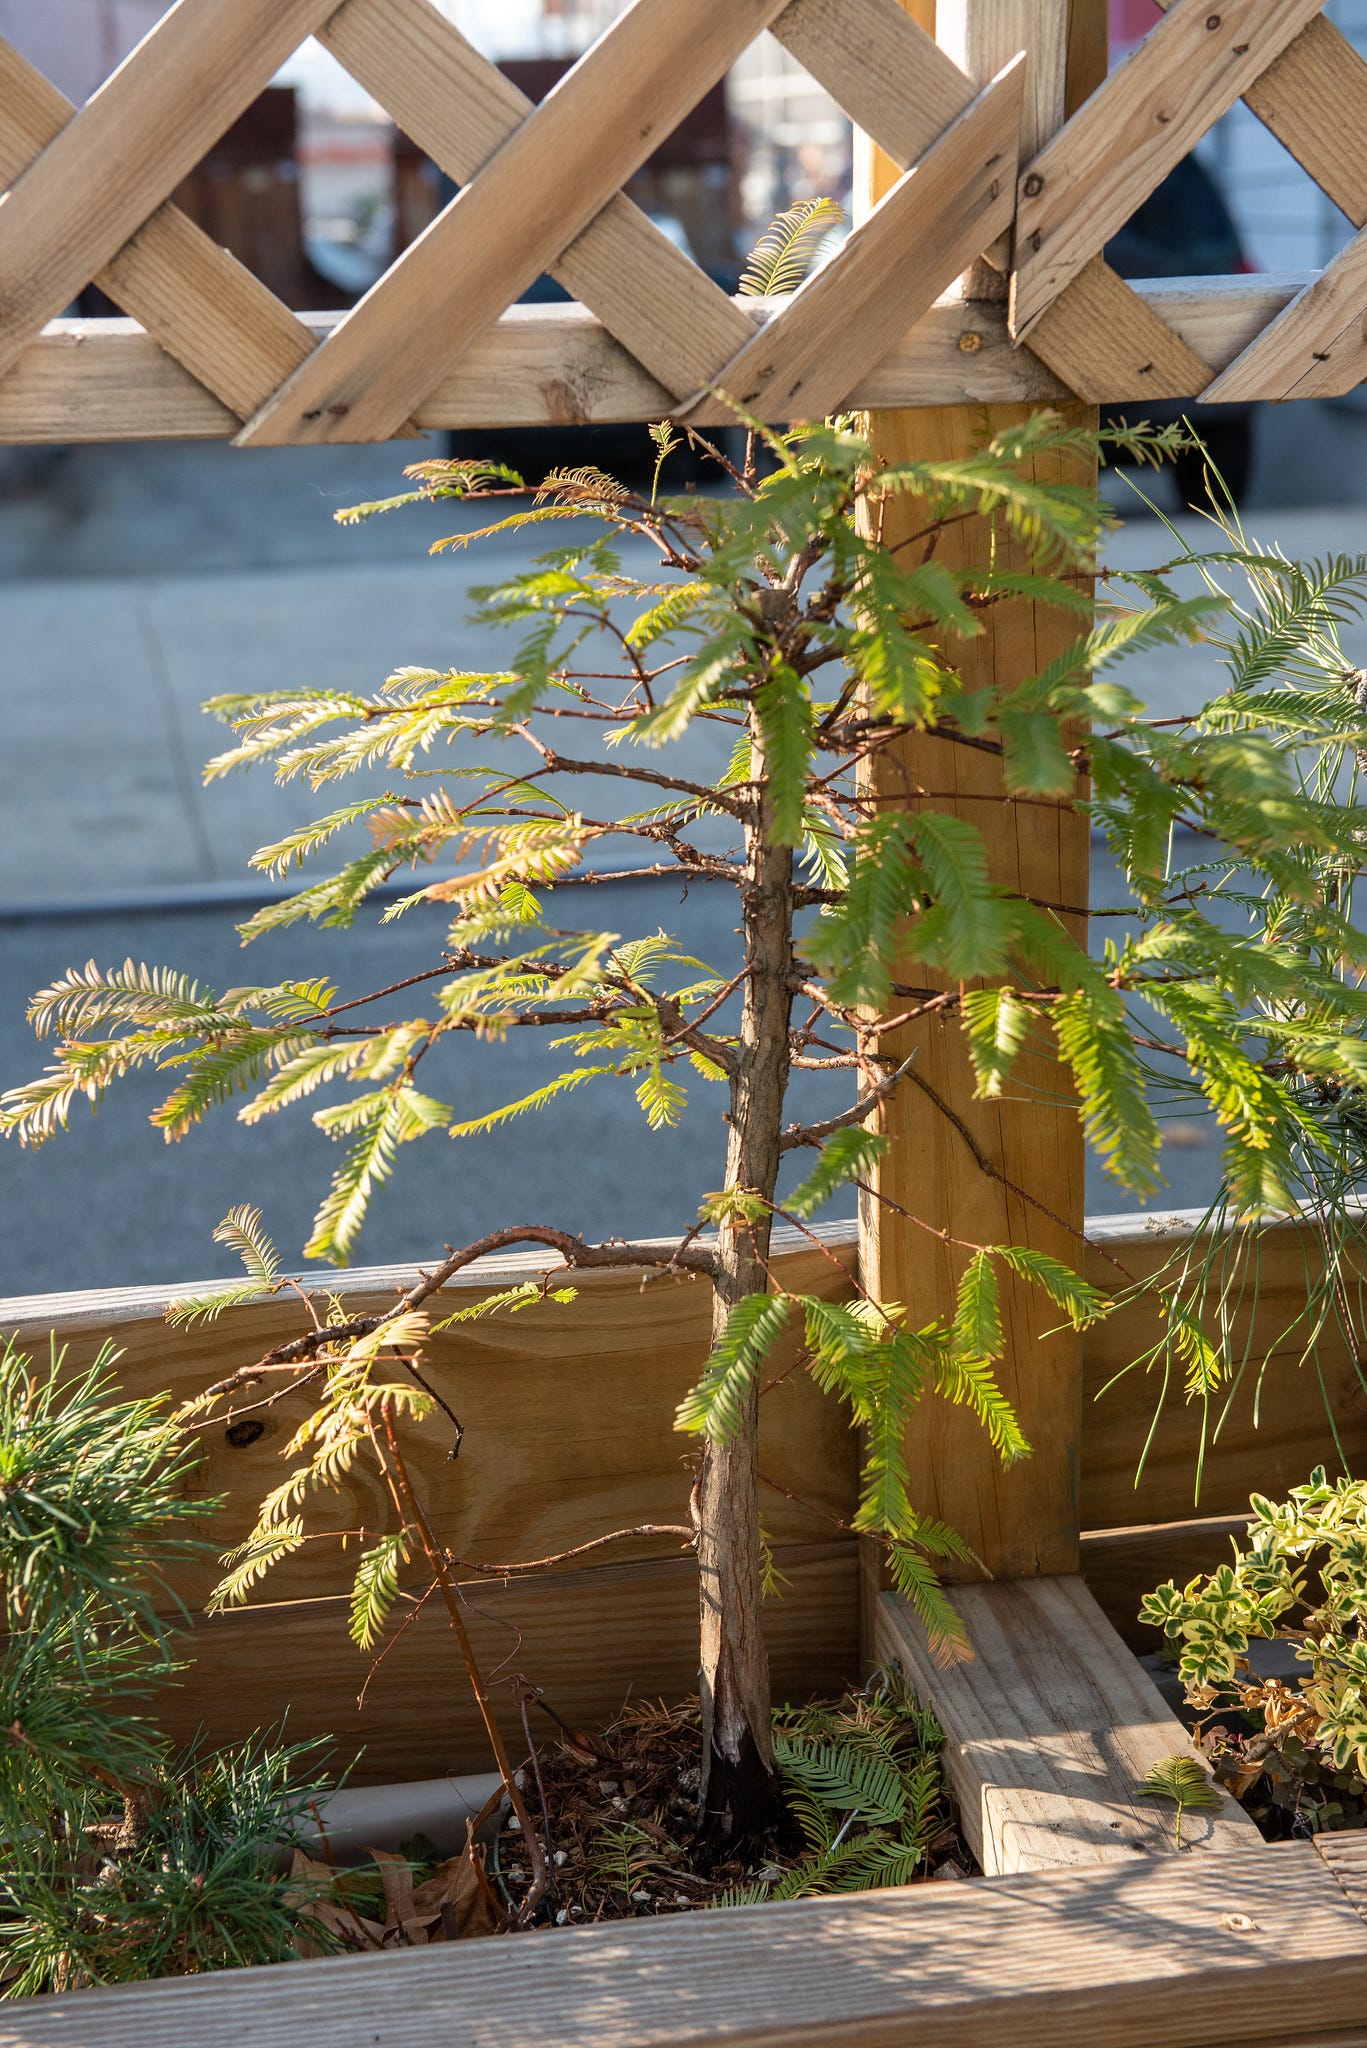 ID: Dawn redwood bonsai in fall with lanky branches and browning leaves at the tips